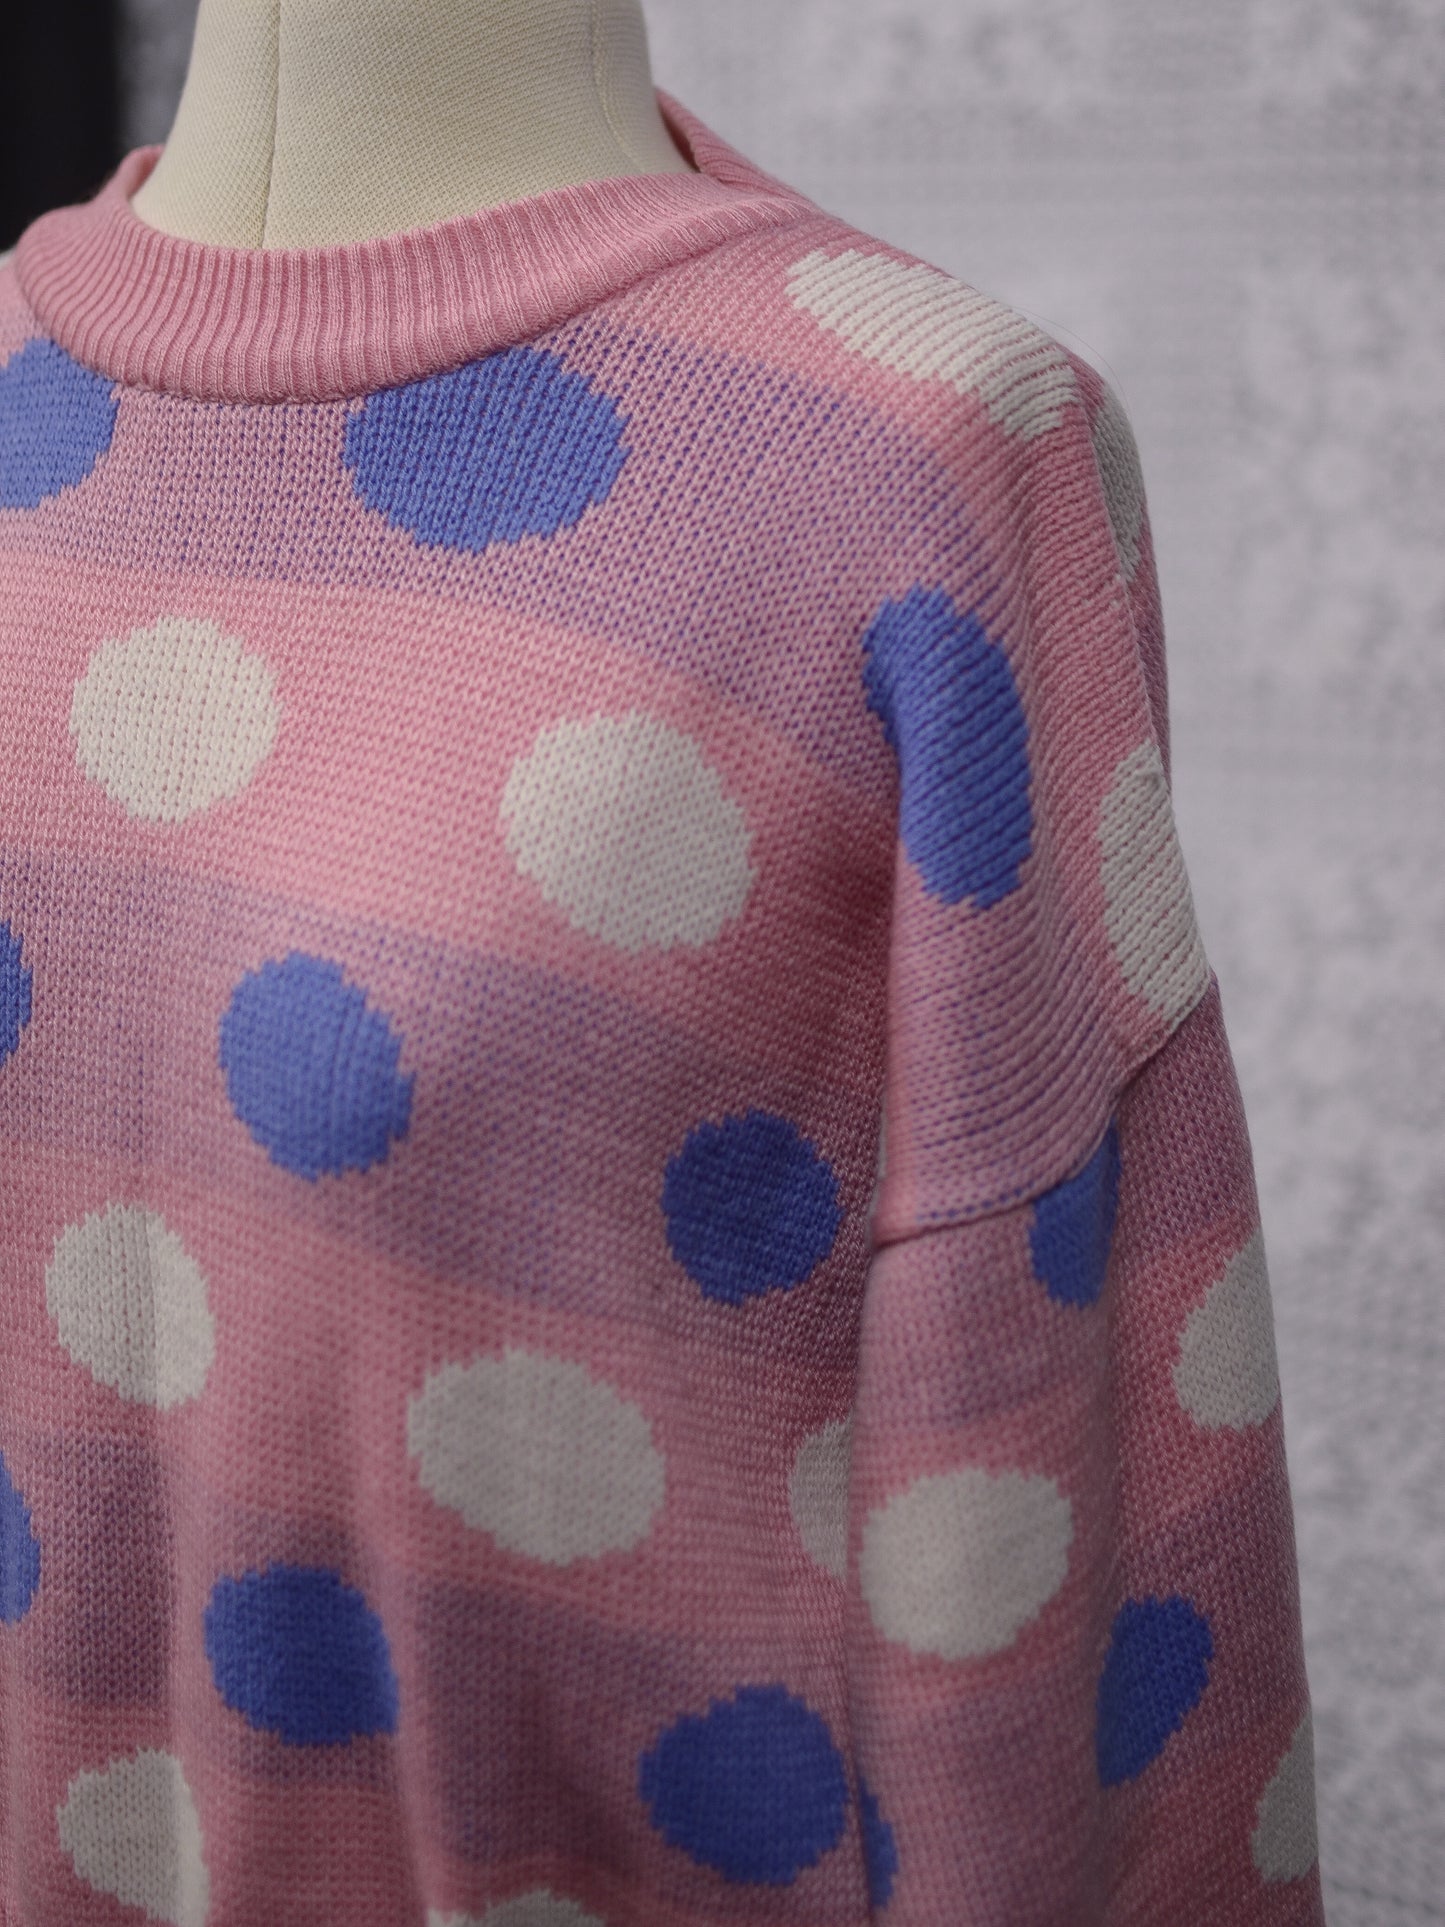 1980s pink, white and blue polkadot jumper